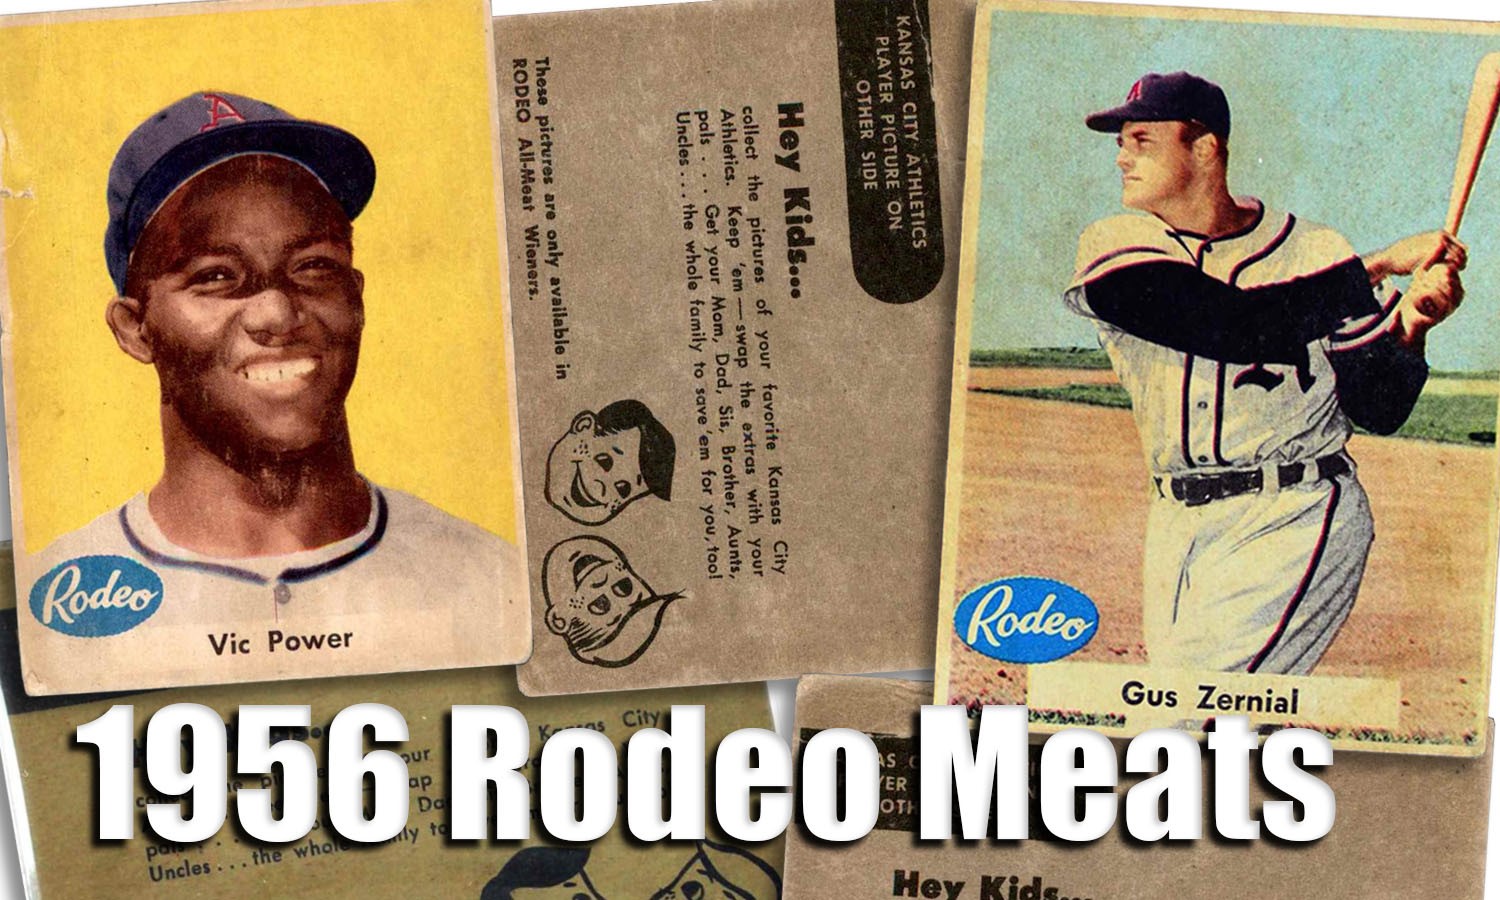 1956 Rodeo Meats 